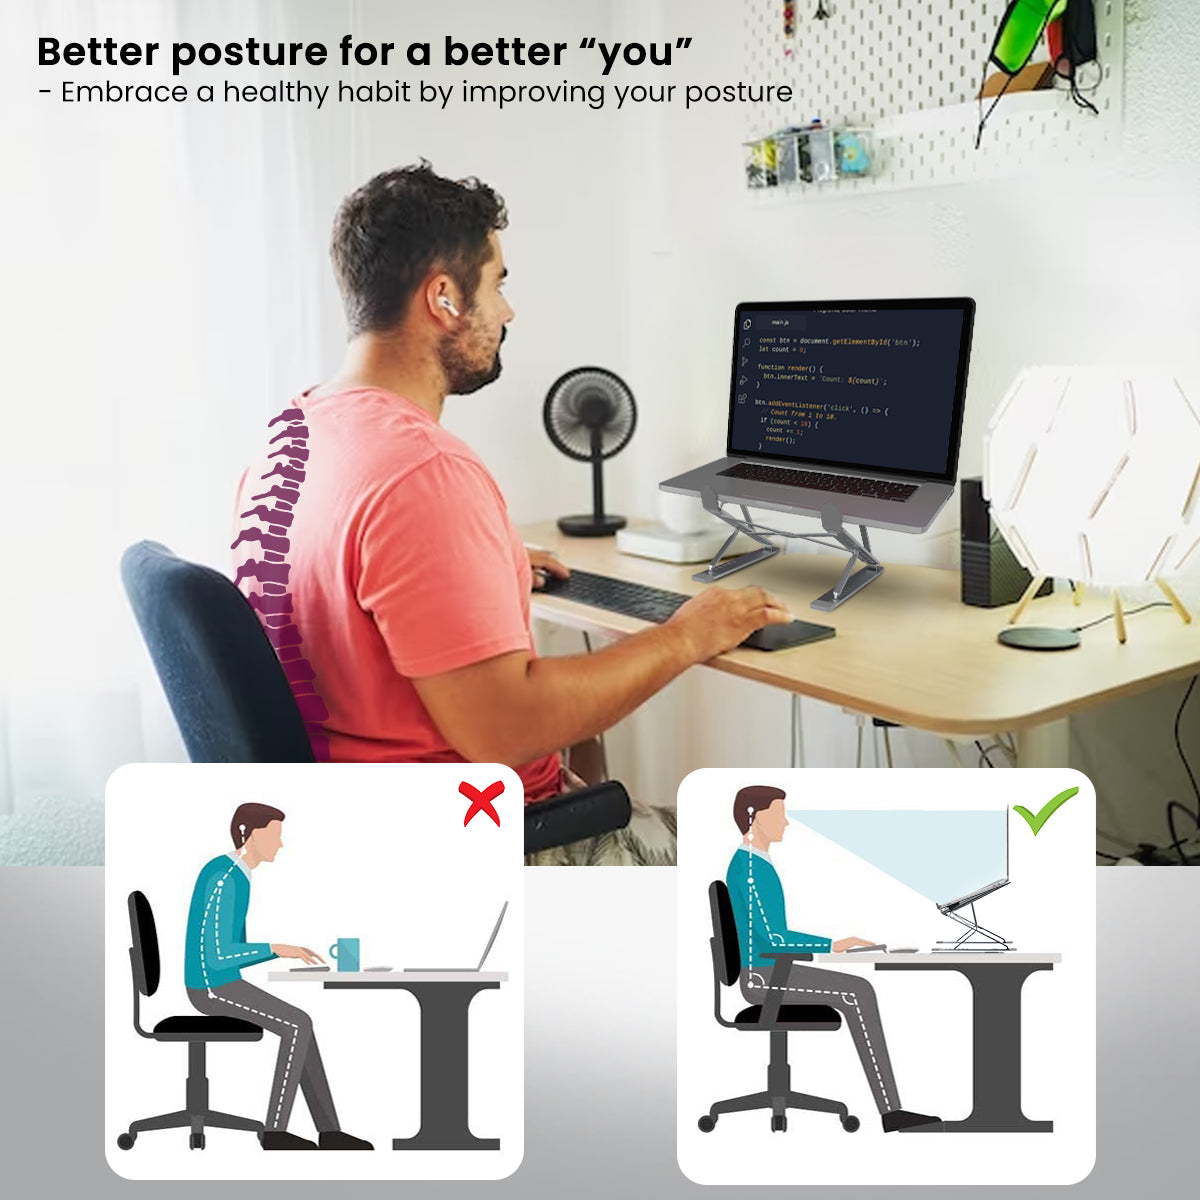 Silver Portronics My Buddy K Pro Adjustable Portable Laptop Stand for Table help in better body posture